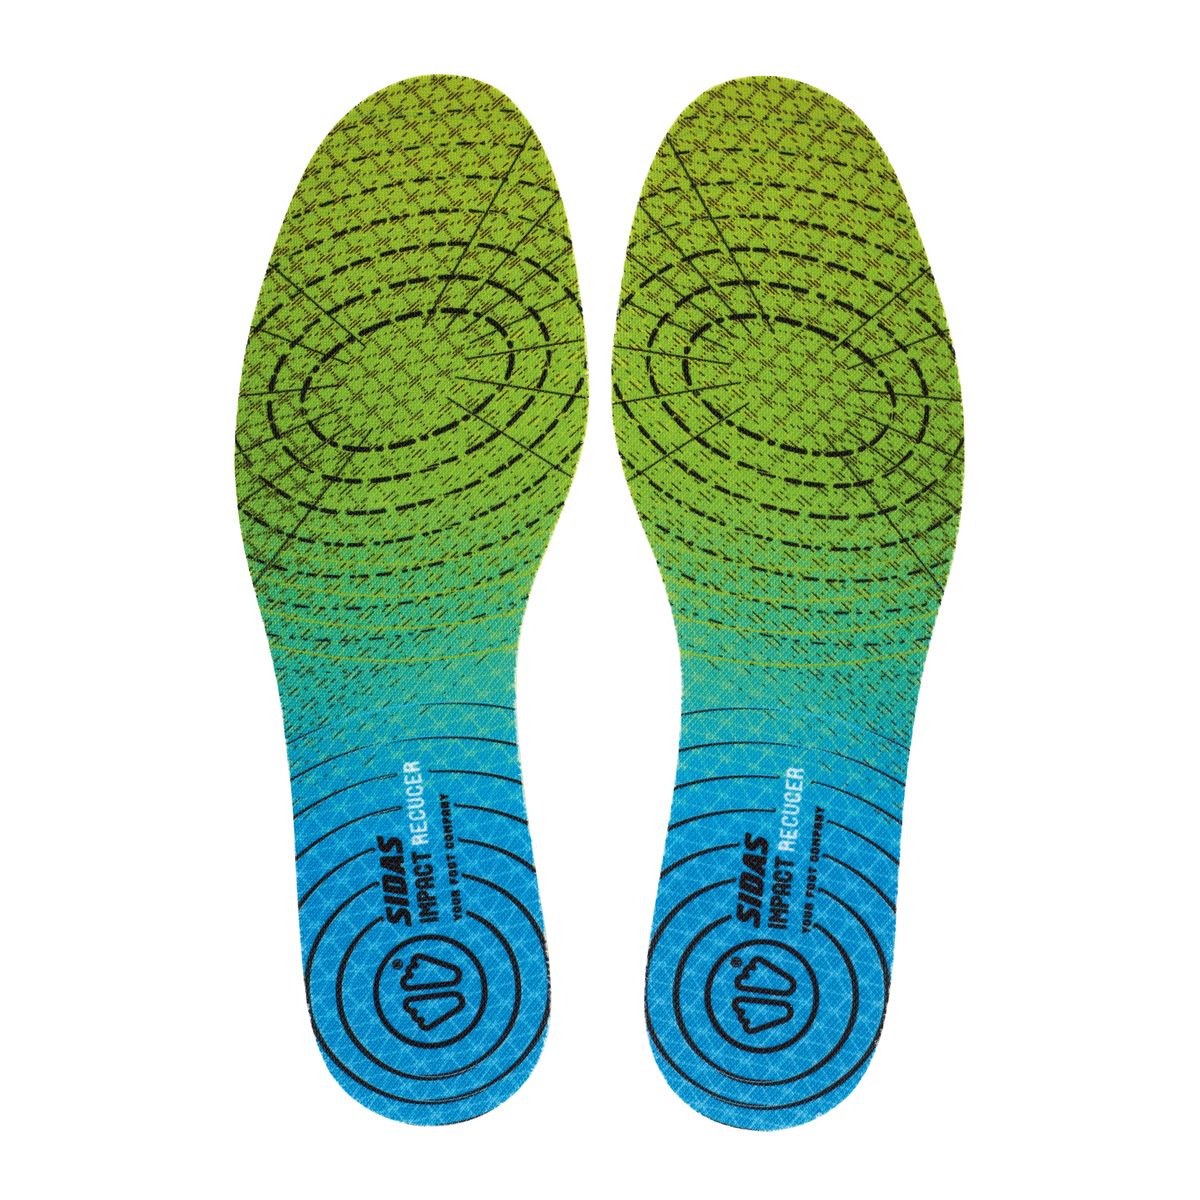 IMPACT REDUCER RUNNING INSOLES